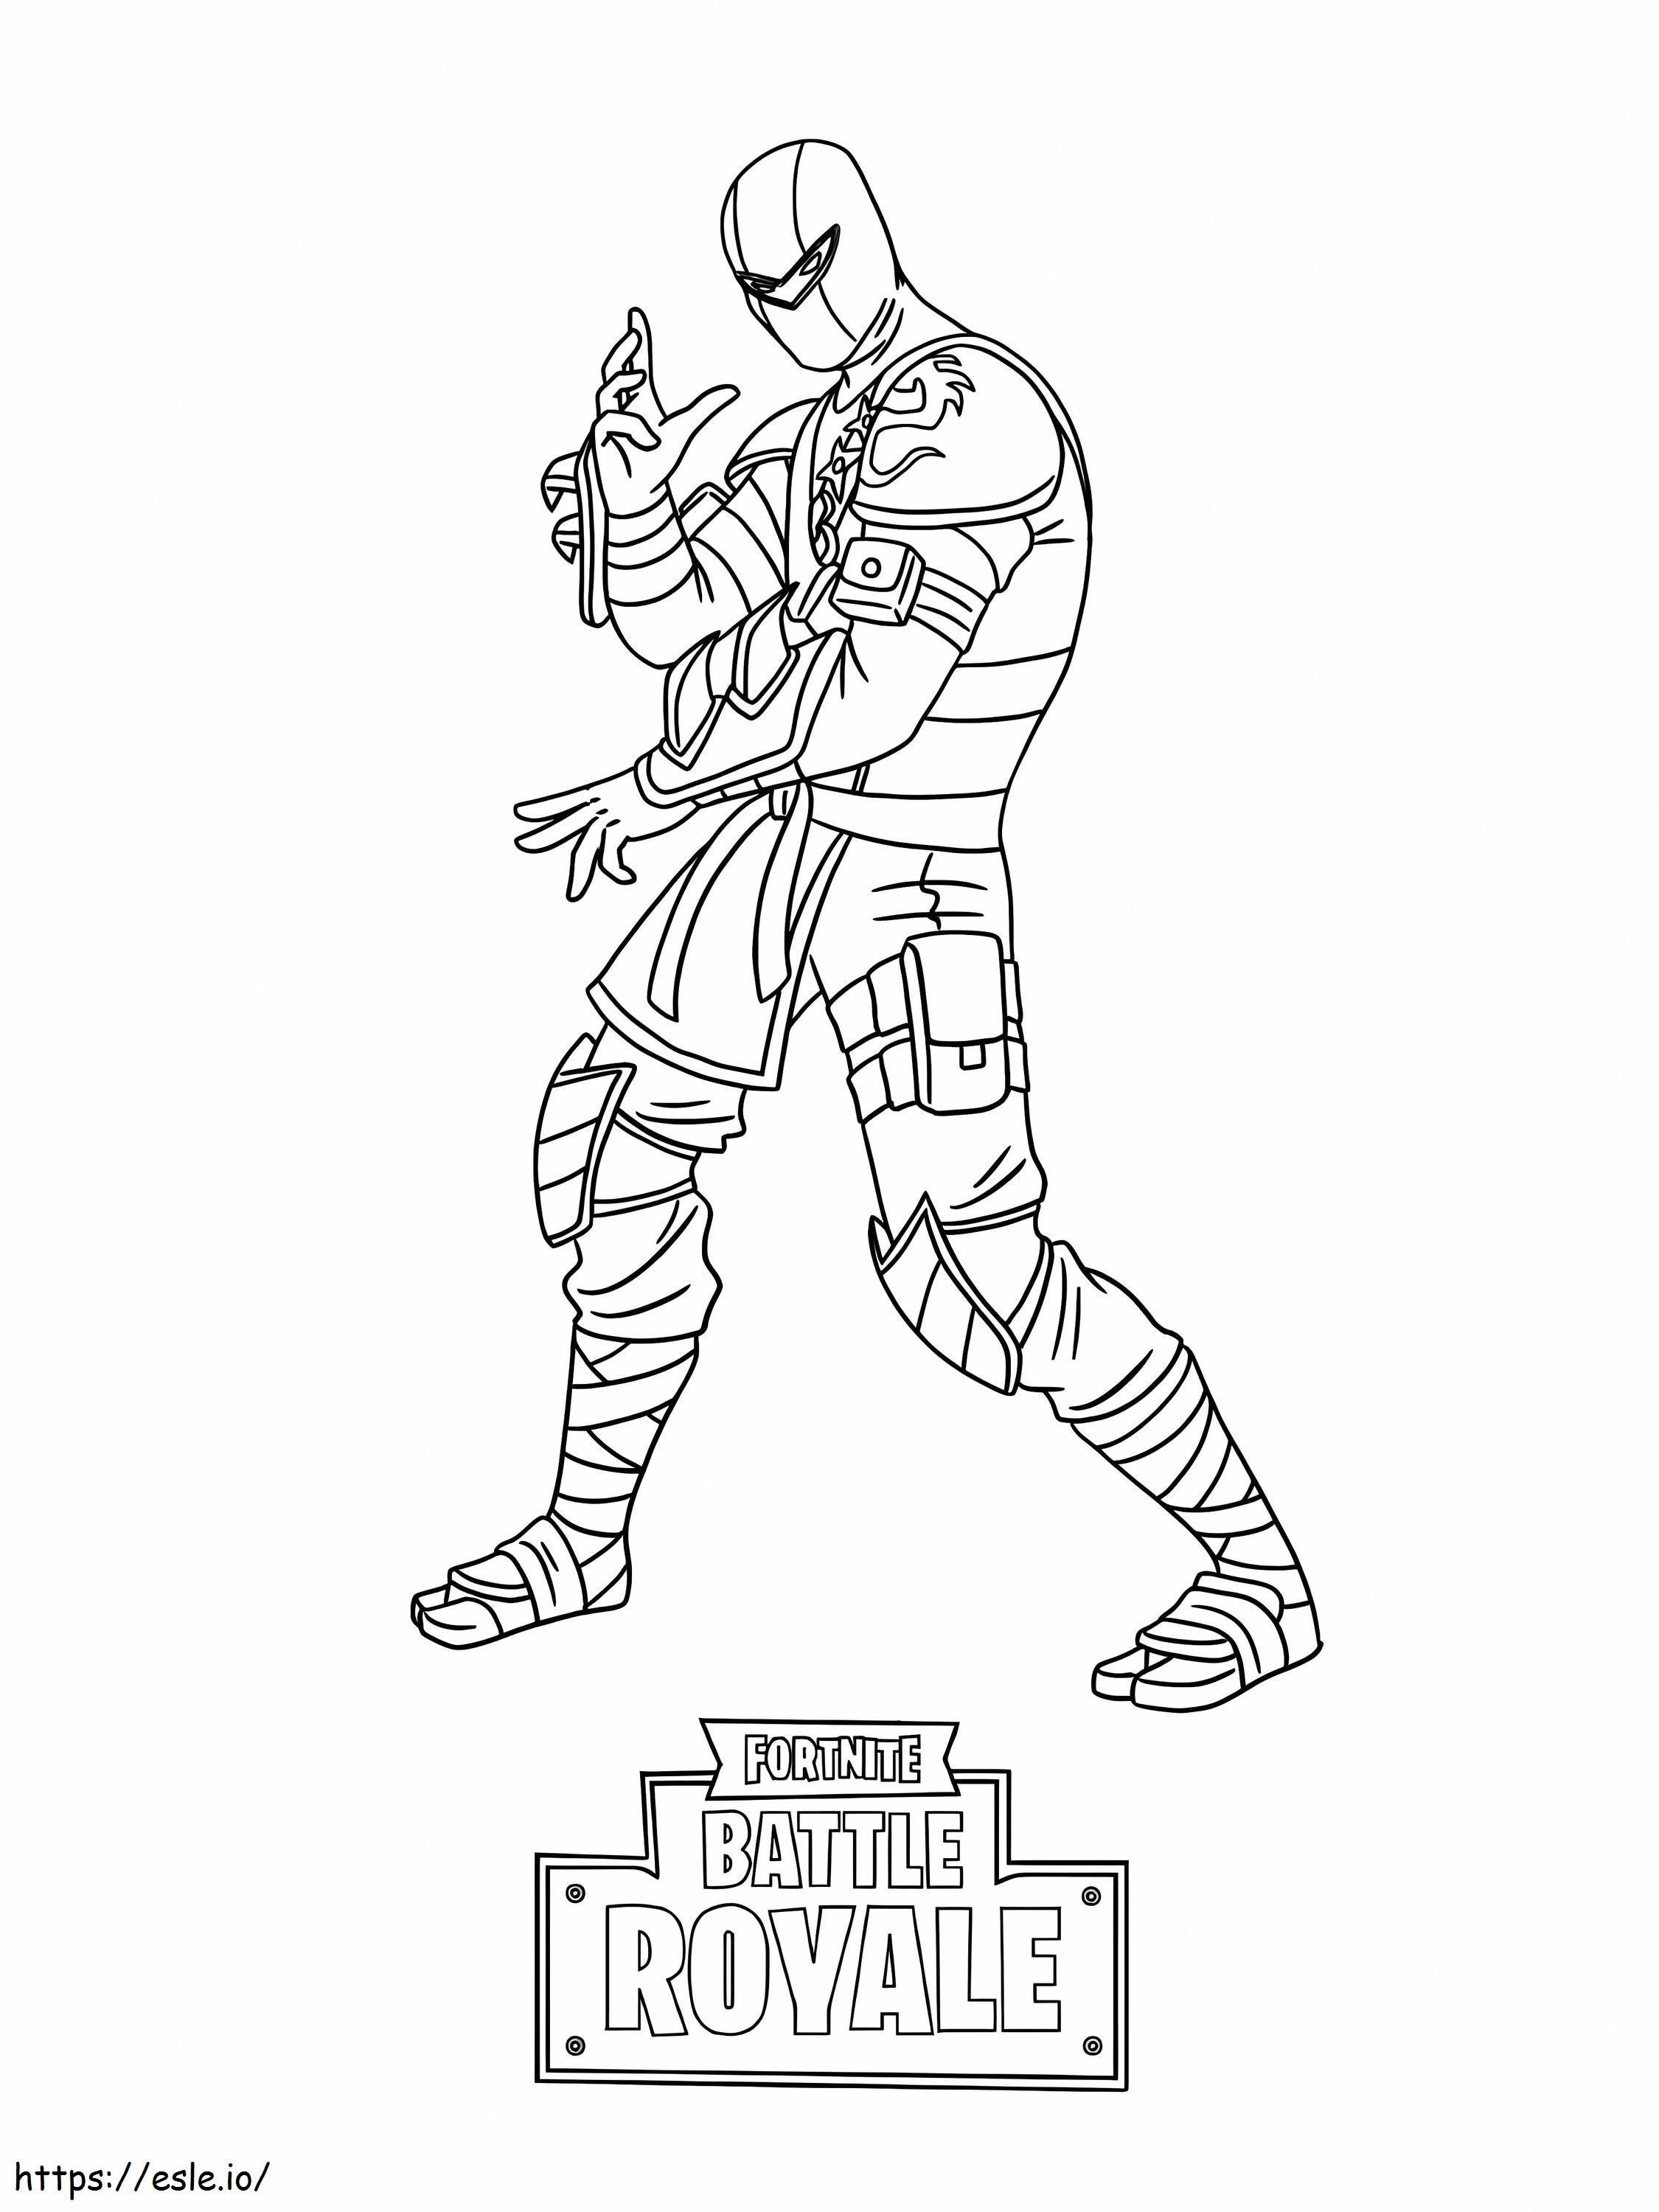 Fortnite 2 coloring page